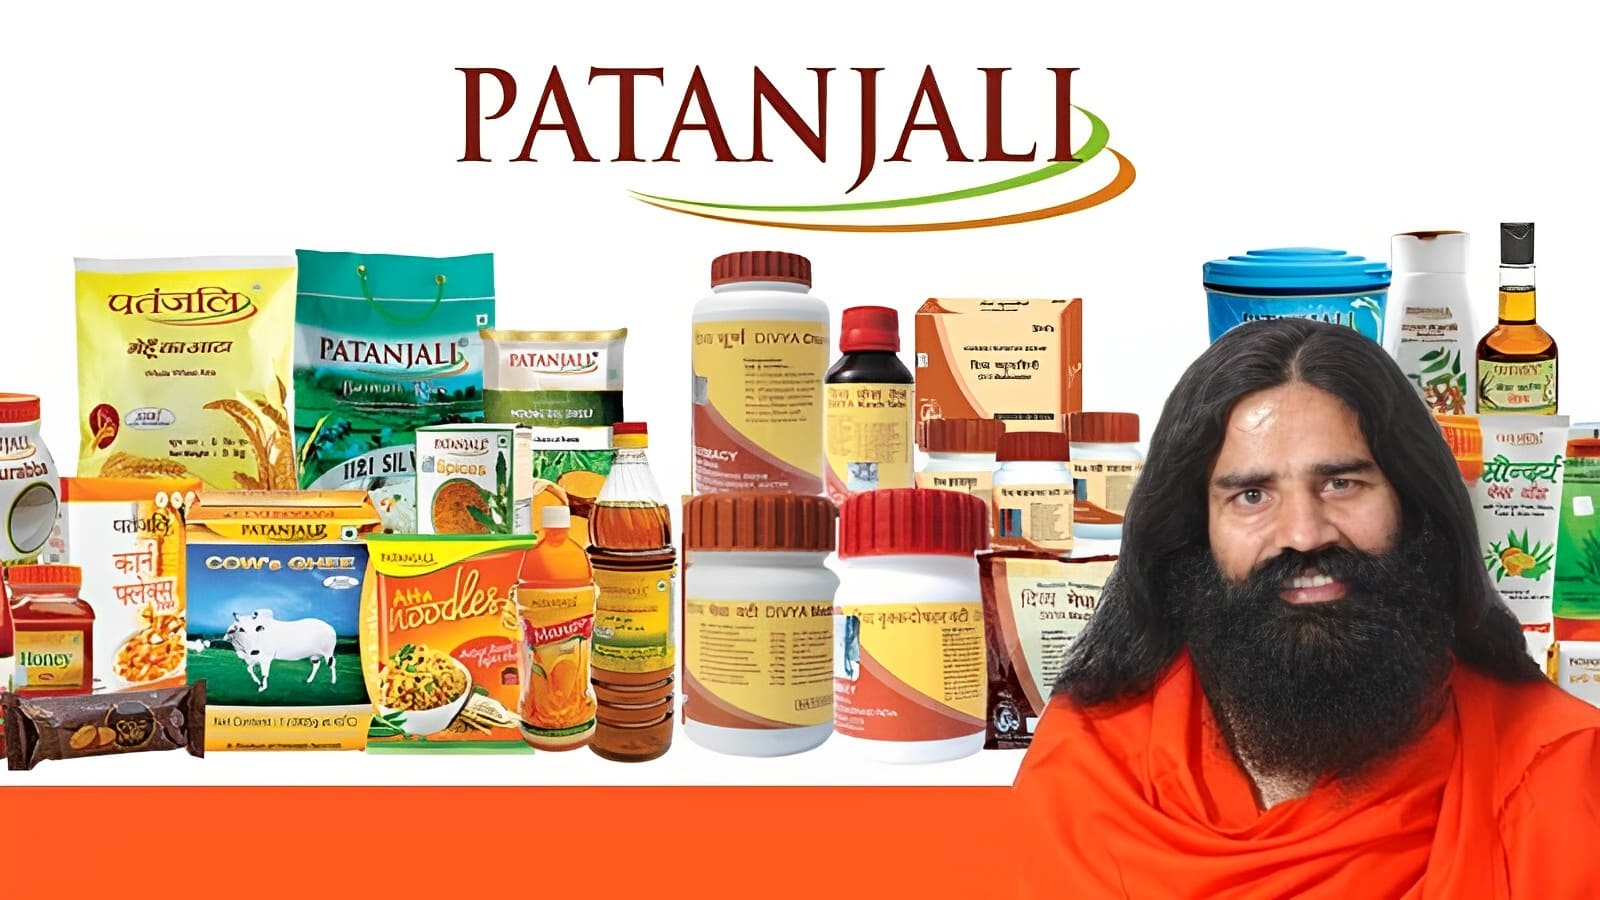 Patanjali Foods to Invest Rs 1,500 Cr on Capex in Next 5 Years